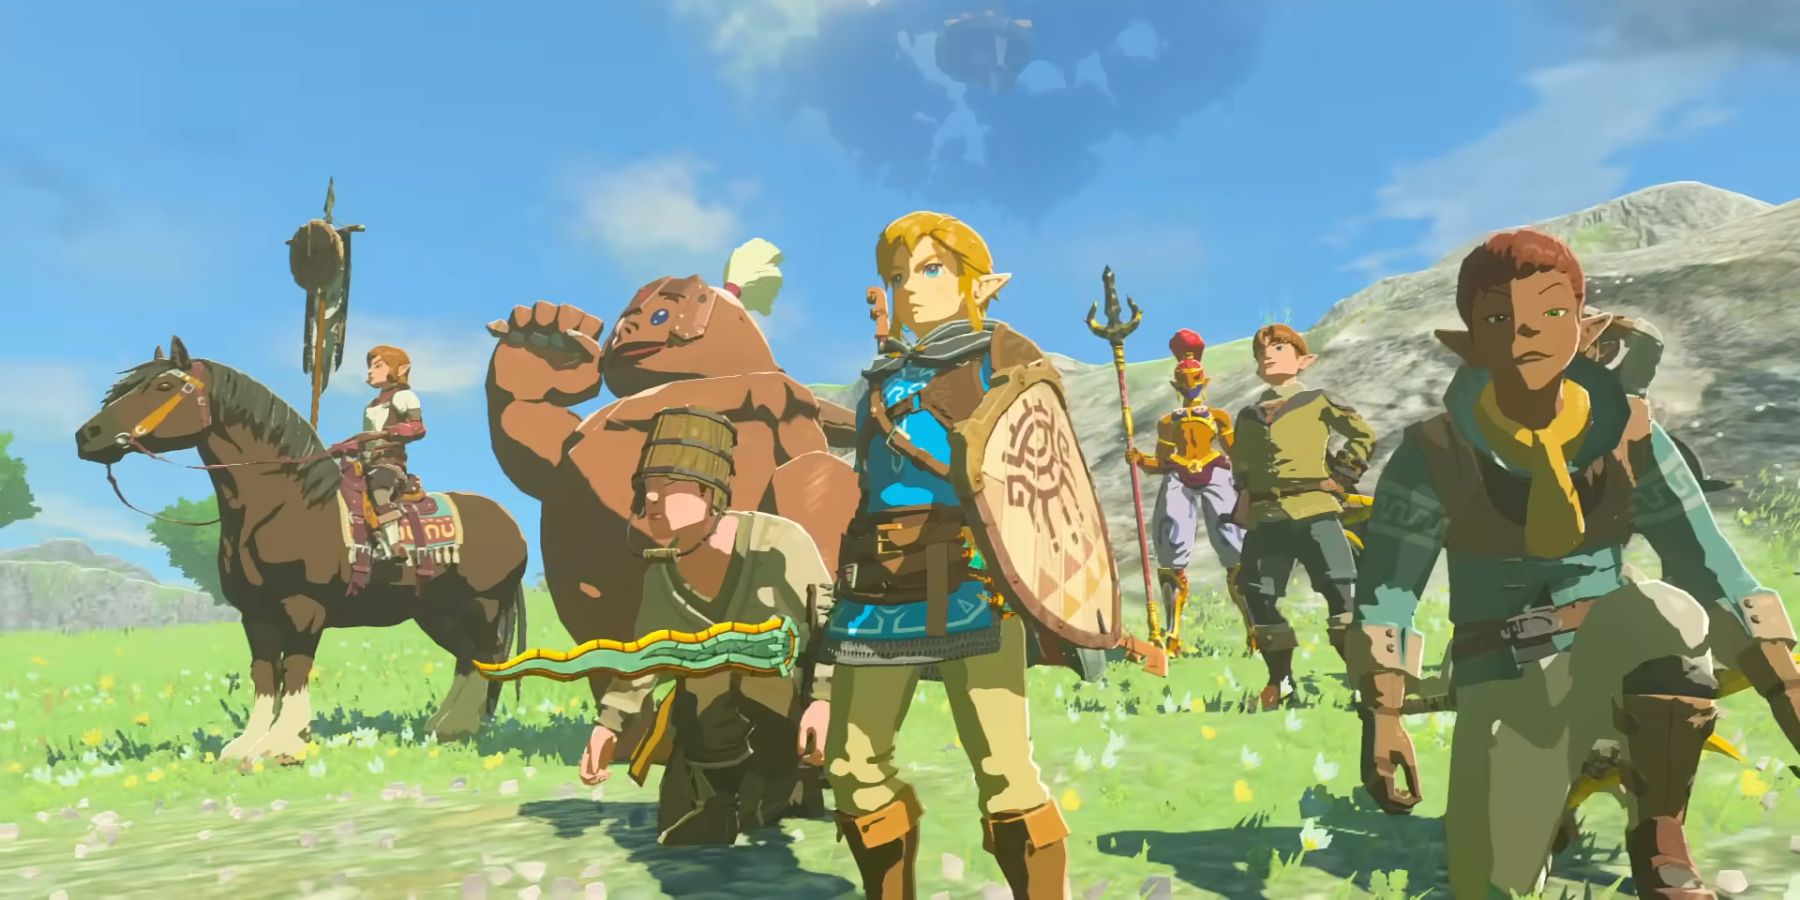 Link and a group of NPCs gathered on a hill side in Tears of the Kingdom.